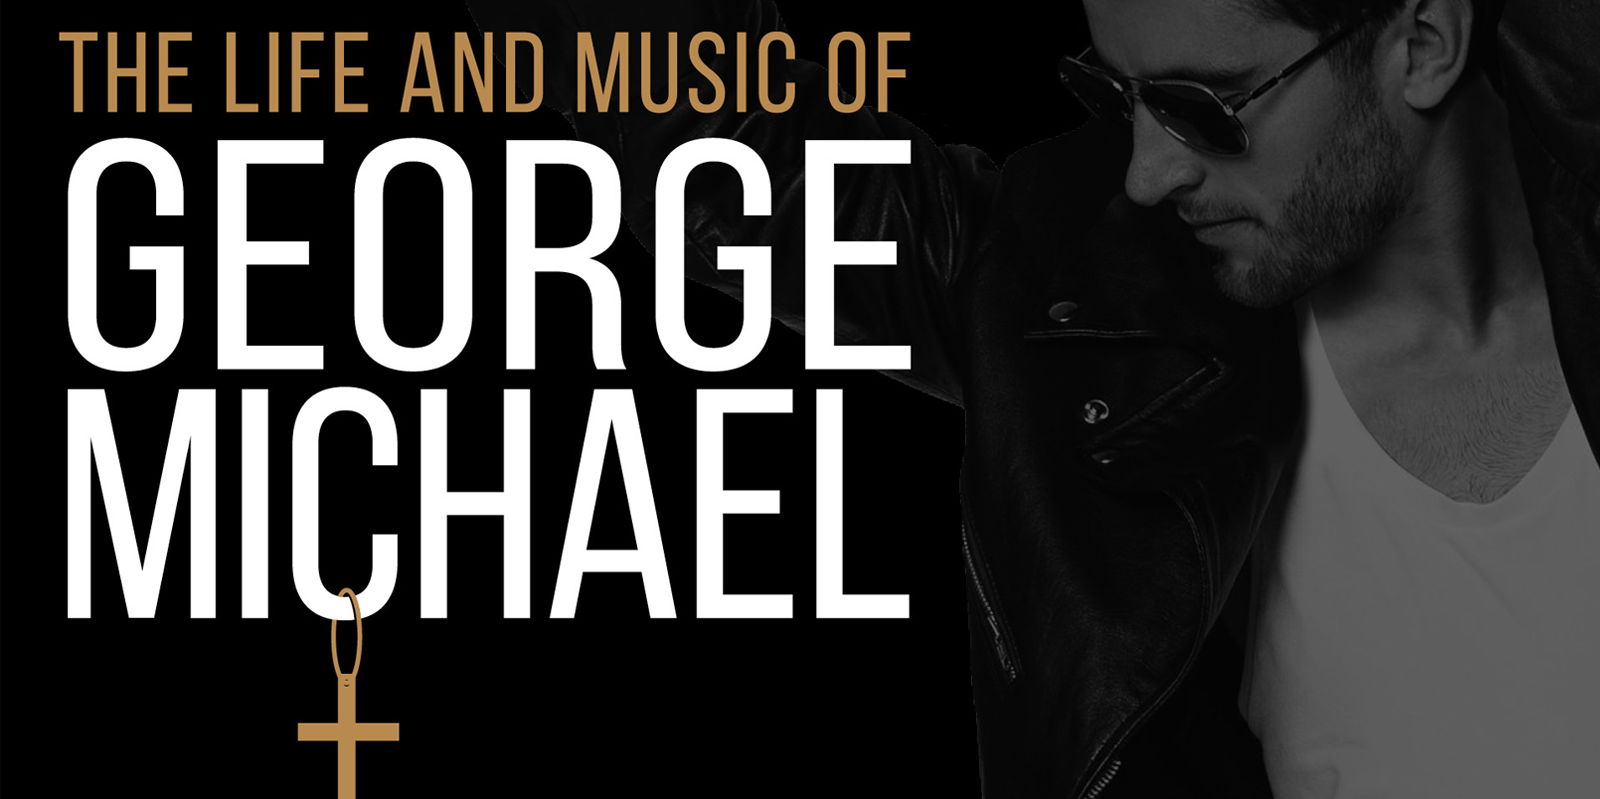 The Life and Music of George Michael promotional image